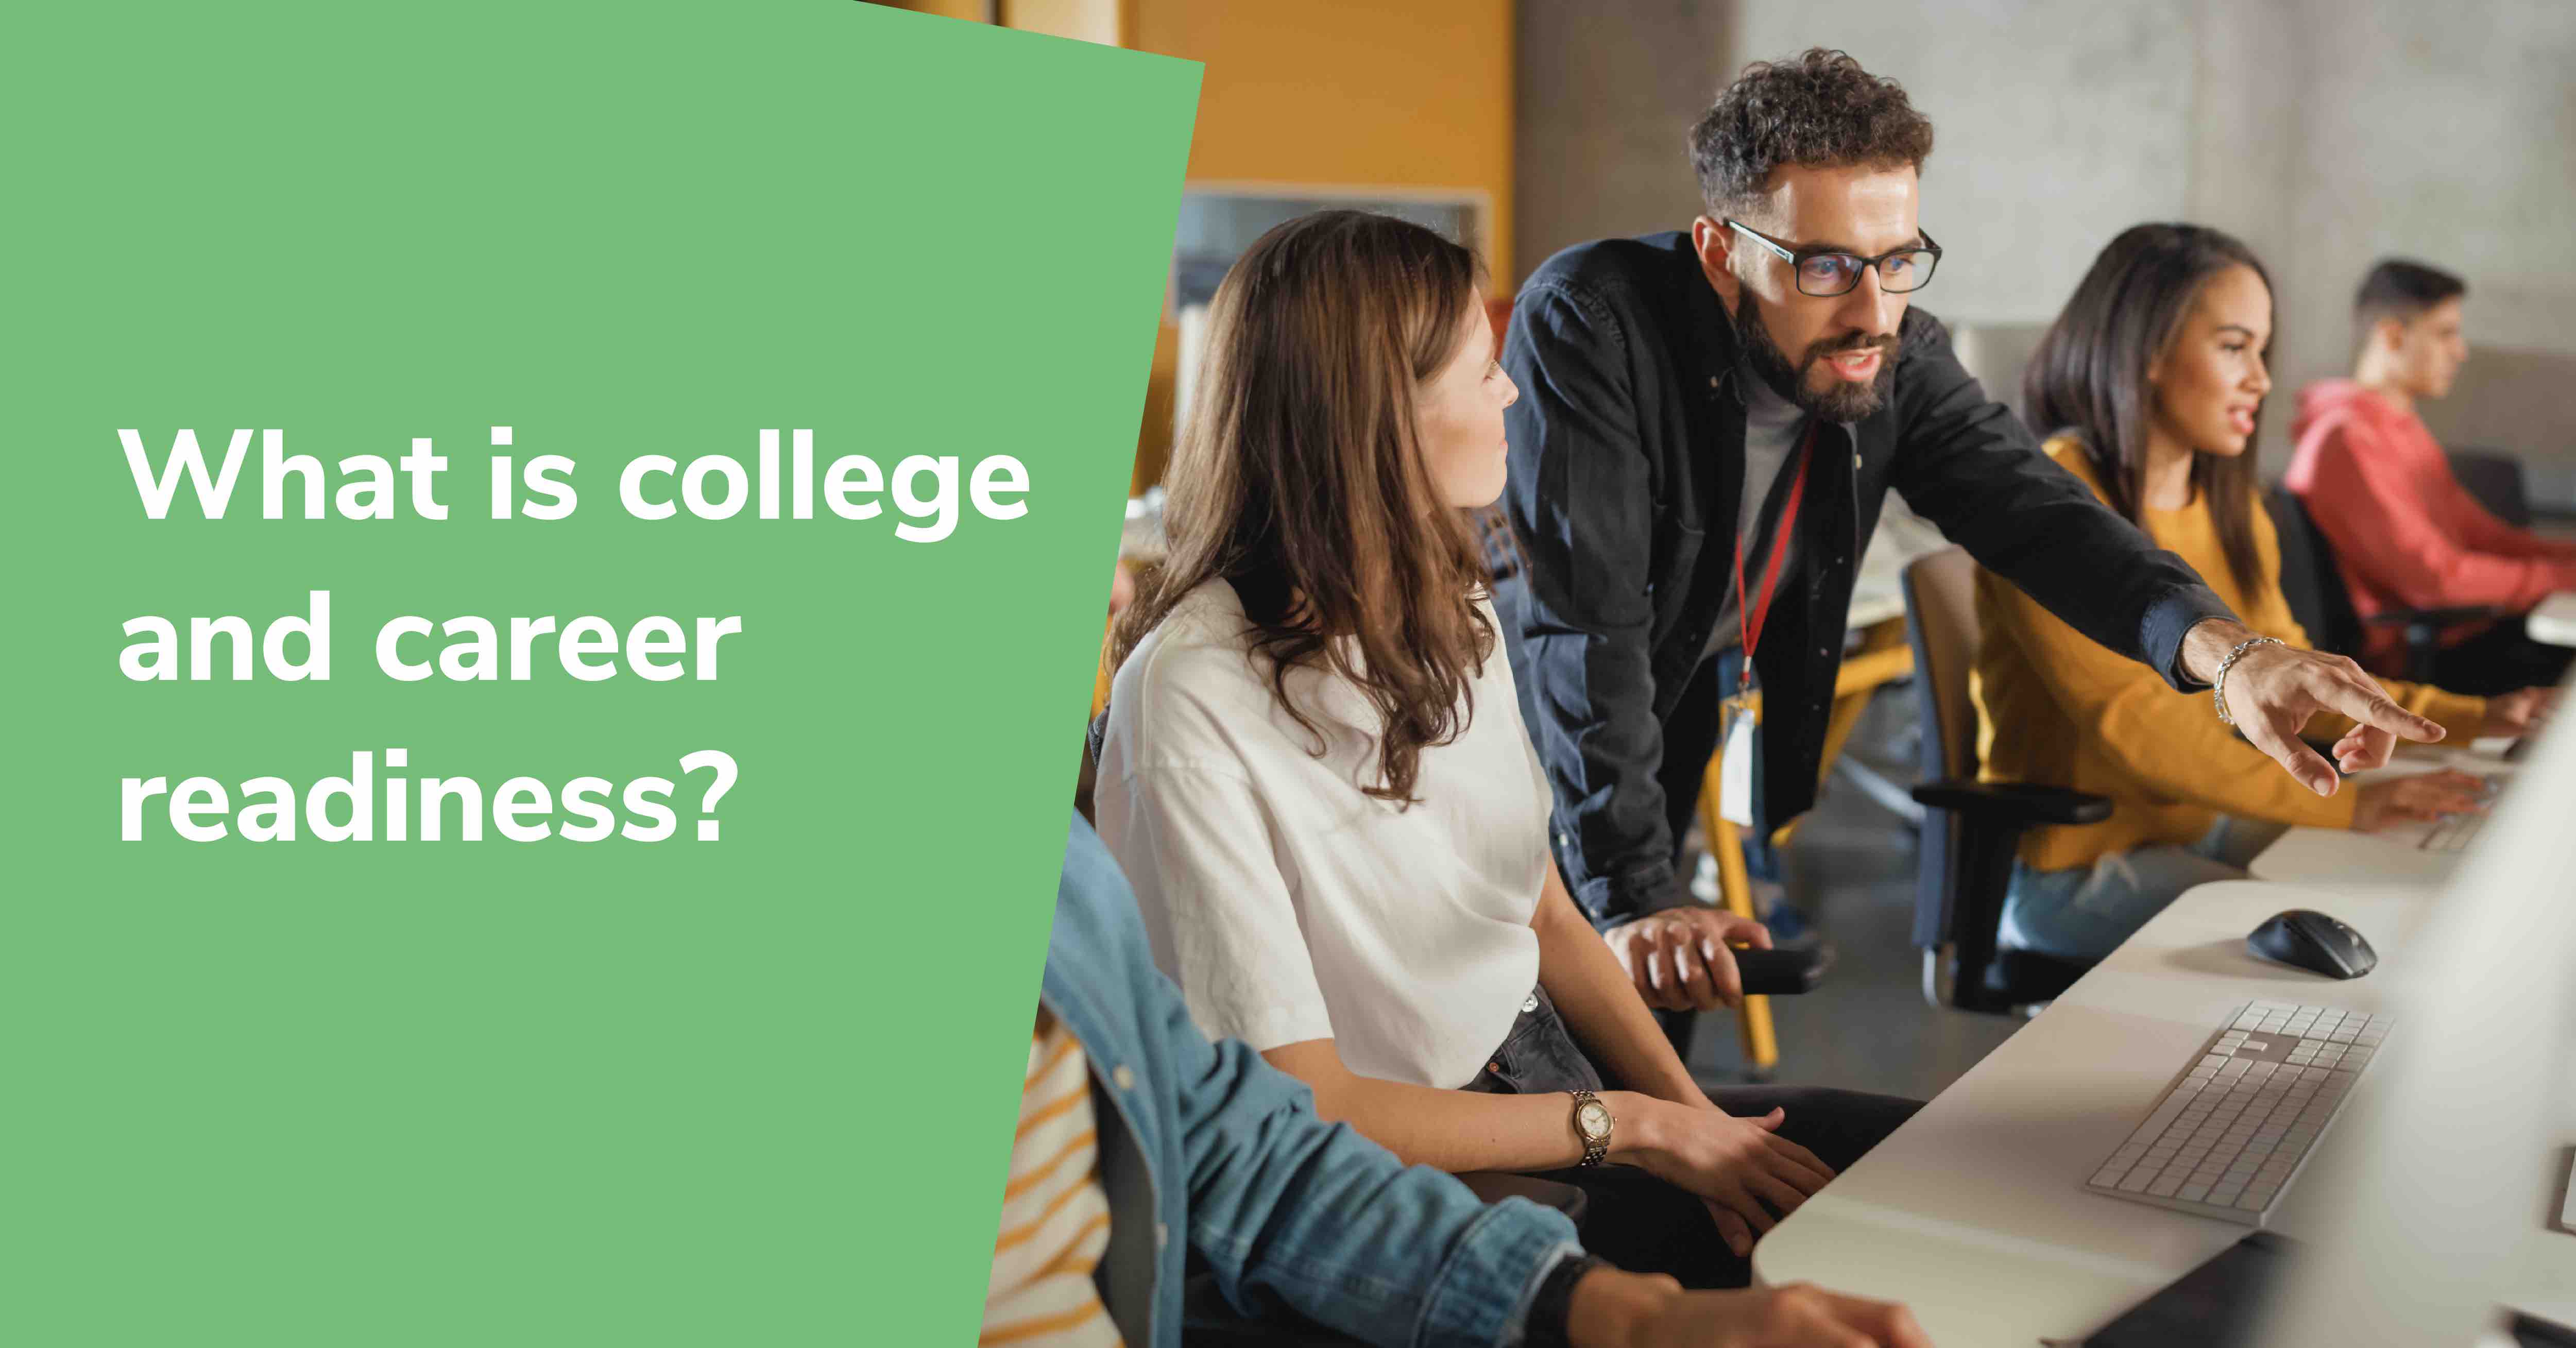 What is college and career readiness?